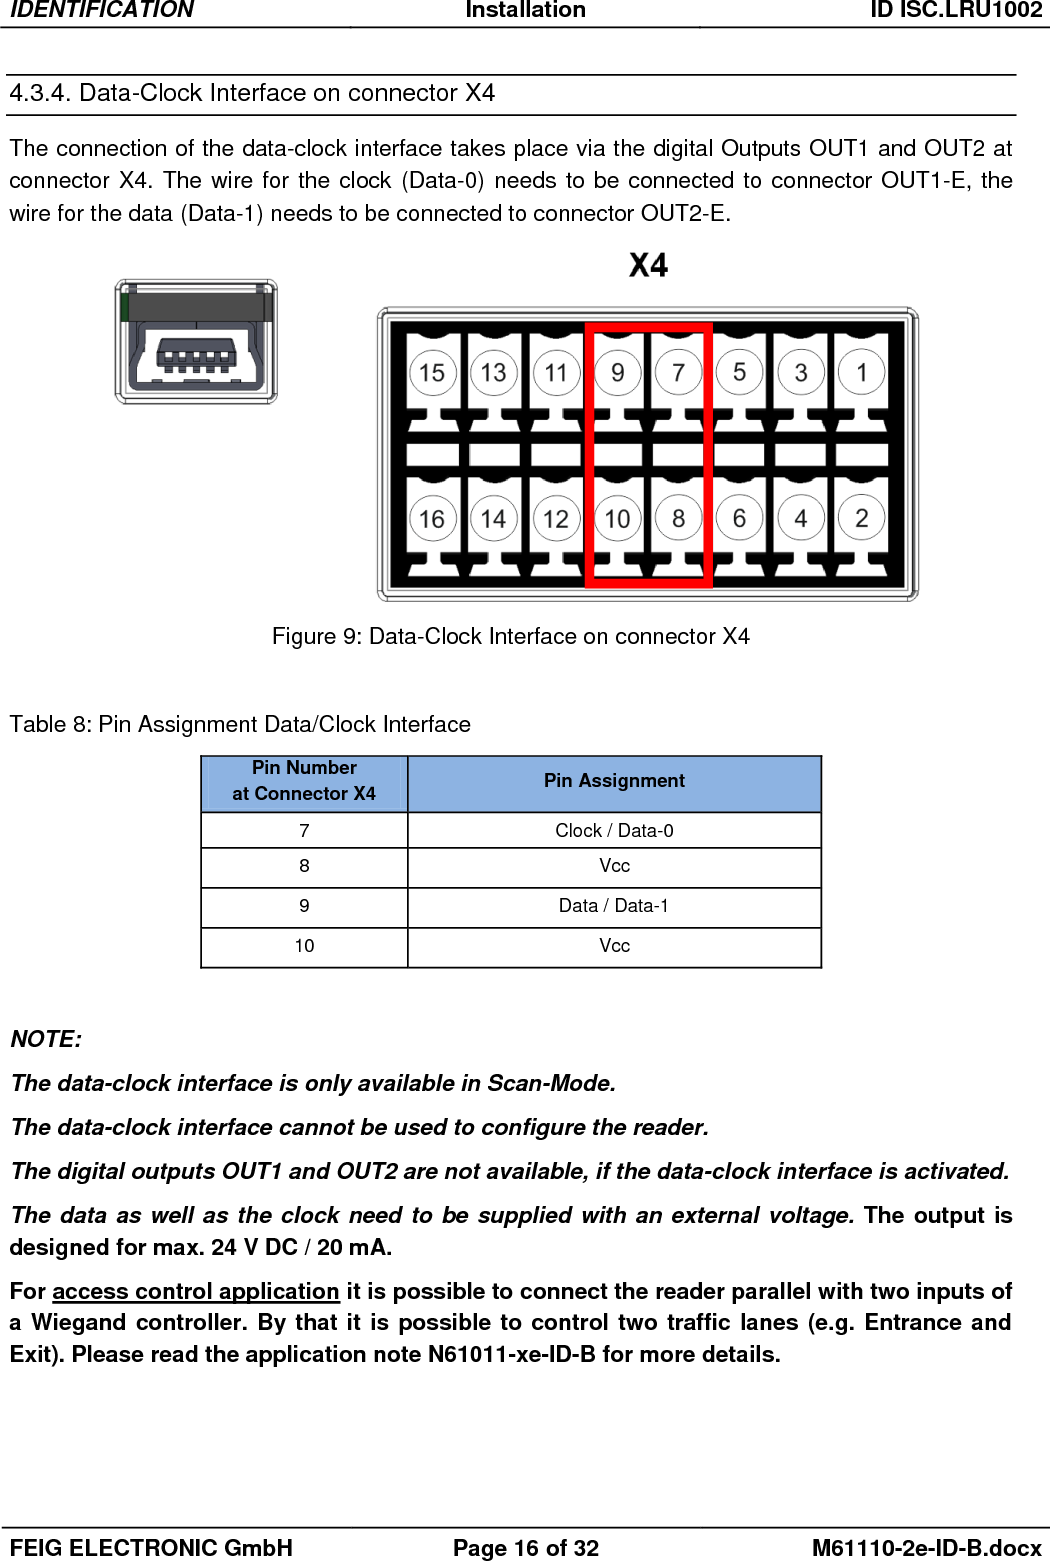 IDENTIFICATION Installation ID ISC.LRU1002  FEIG ELECTRONIC GmbH Page 16 of 32 M61110-2e-ID-B.docx  4.3.4. Data-Clock Interface on connector X4 The connection of the data-clock interface takes place via the digital Outputs OUT1 and OUT2 at connector X4. The wire for the clock (Data-0) needs to be connected to connector OUT1-E, the wire for the data (Data-1) needs to be connected to connector OUT2-E.   Figure 9: Data-Clock Interface on connector X4  Table 8: Pin Assignment Data/Clock Interface Pin Number  at Connector X4 Pin Assignment 7 Clock / Data-0 8 Vcc 9 Data / Data-1 10 Vcc  NOTE: The data-clock interface is only available in Scan-Mode. The data-clock interface cannot be used to configure the reader. The digital outputs OUT1 and OUT2 are not available, if the data-clock interface is activated. The data as well as the clock need to be supplied with an external voltage.  The output is designed for max. 24 V DC / 20 mA. For access control application it is possible to connect the reader parallel with two inputs of a Wiegand controller. By that it is possible to control two traffic lanes (e.g. Entrance and Exit). Please read the application note N61011-xe-ID-B for more details.   